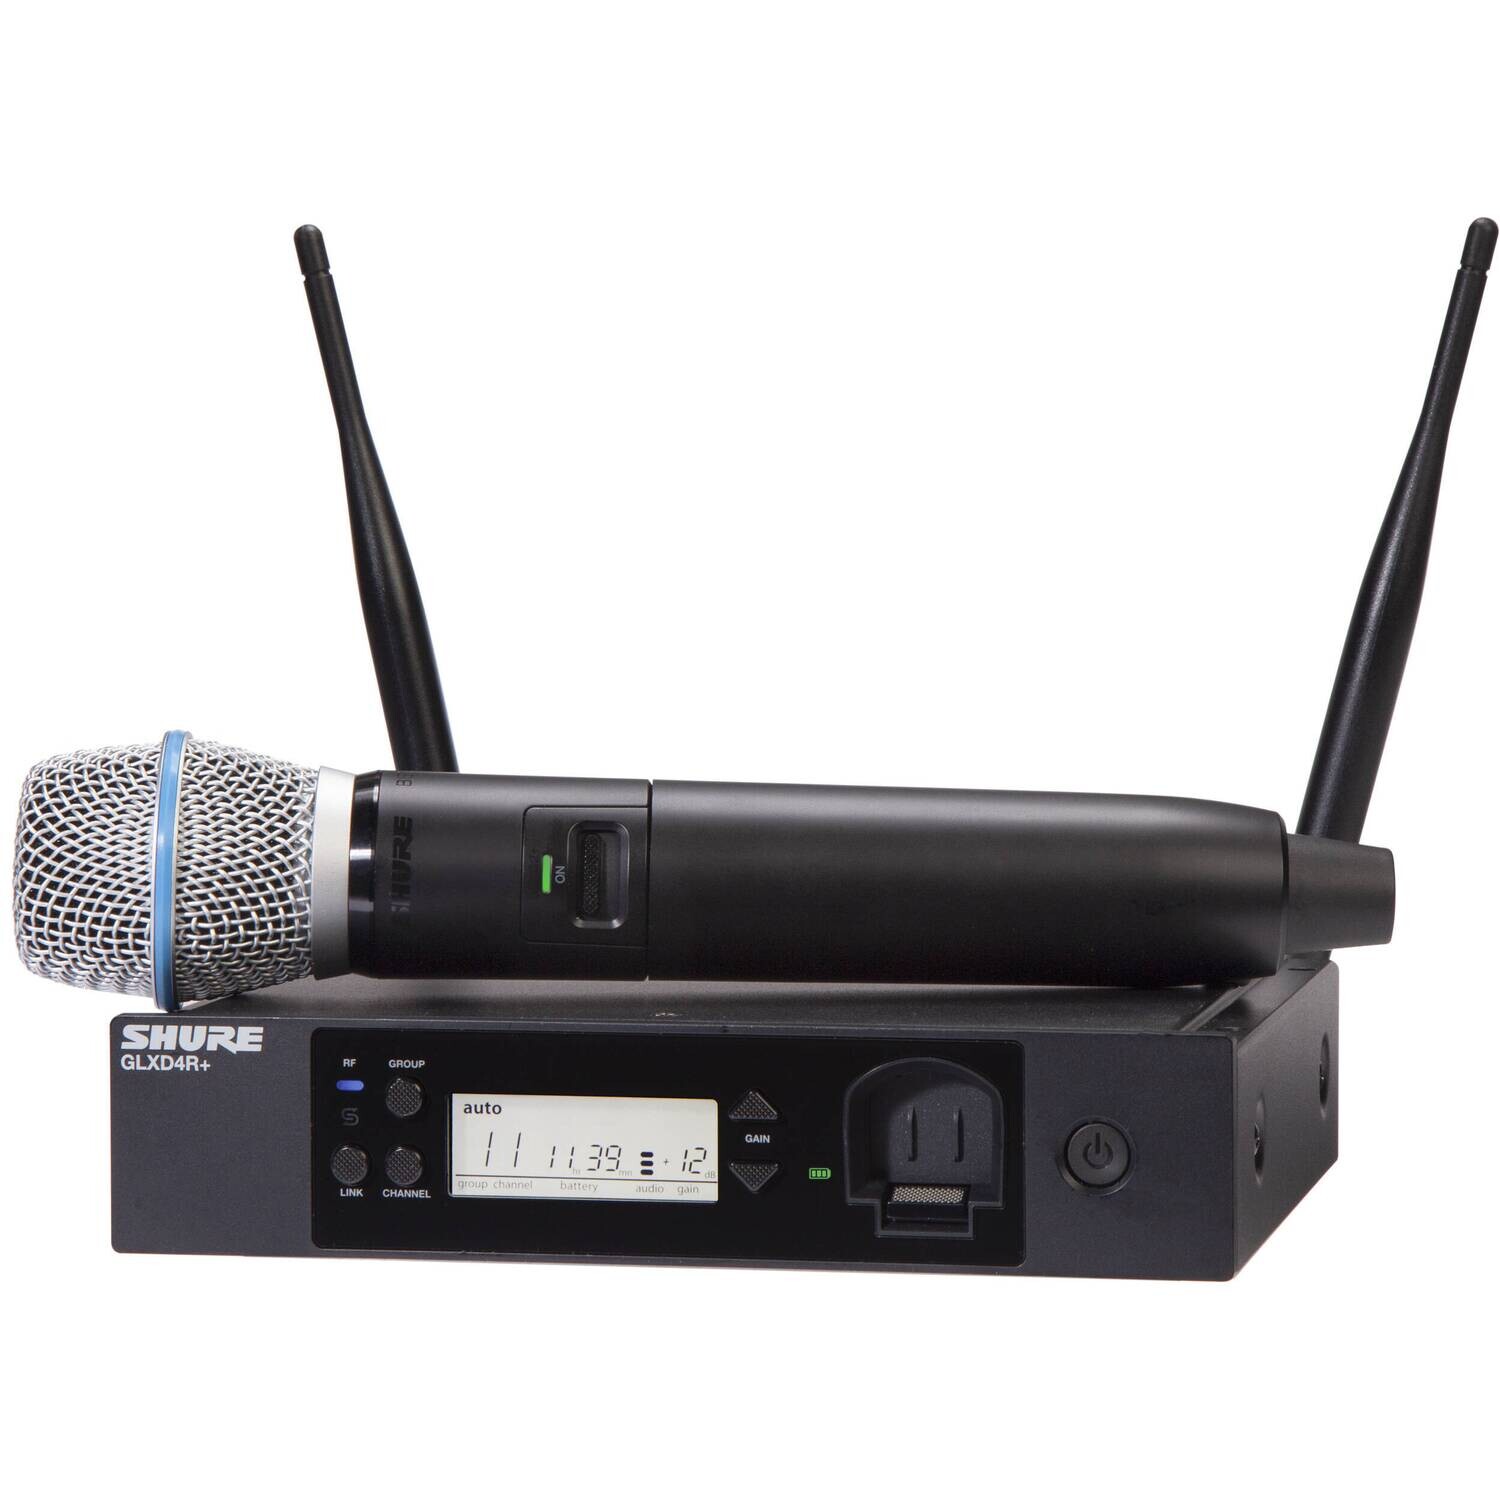 Shure GLXD24R+/B87A
(Digital Wireless Rack System with BETA®87A Vocal Microphone)